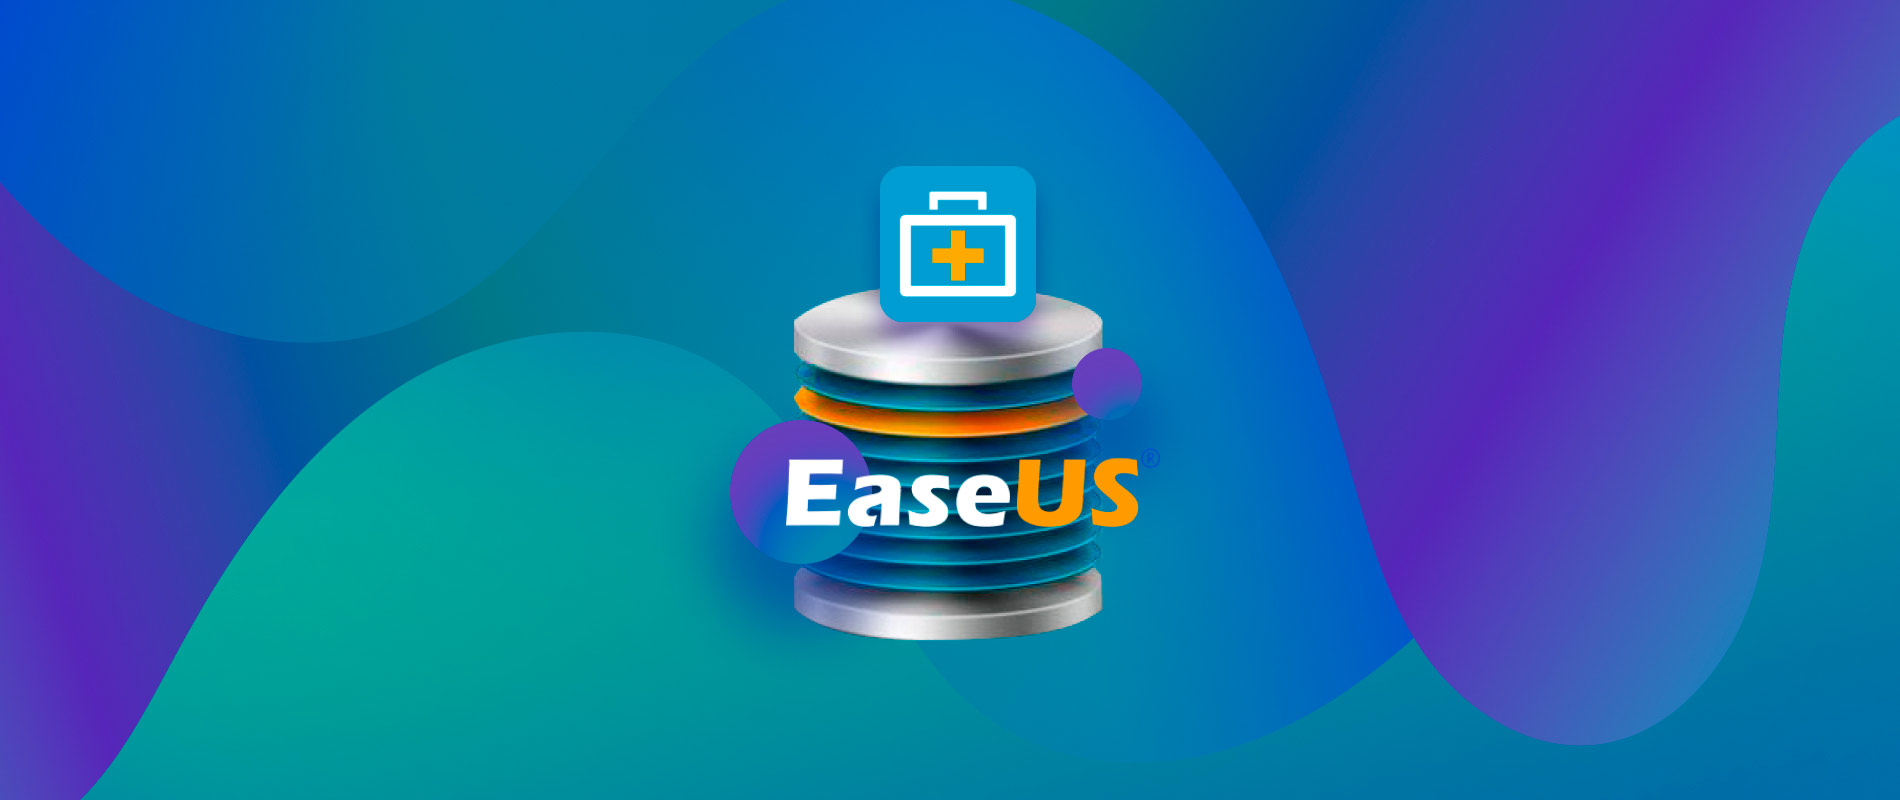 easeus data recovery pro free download